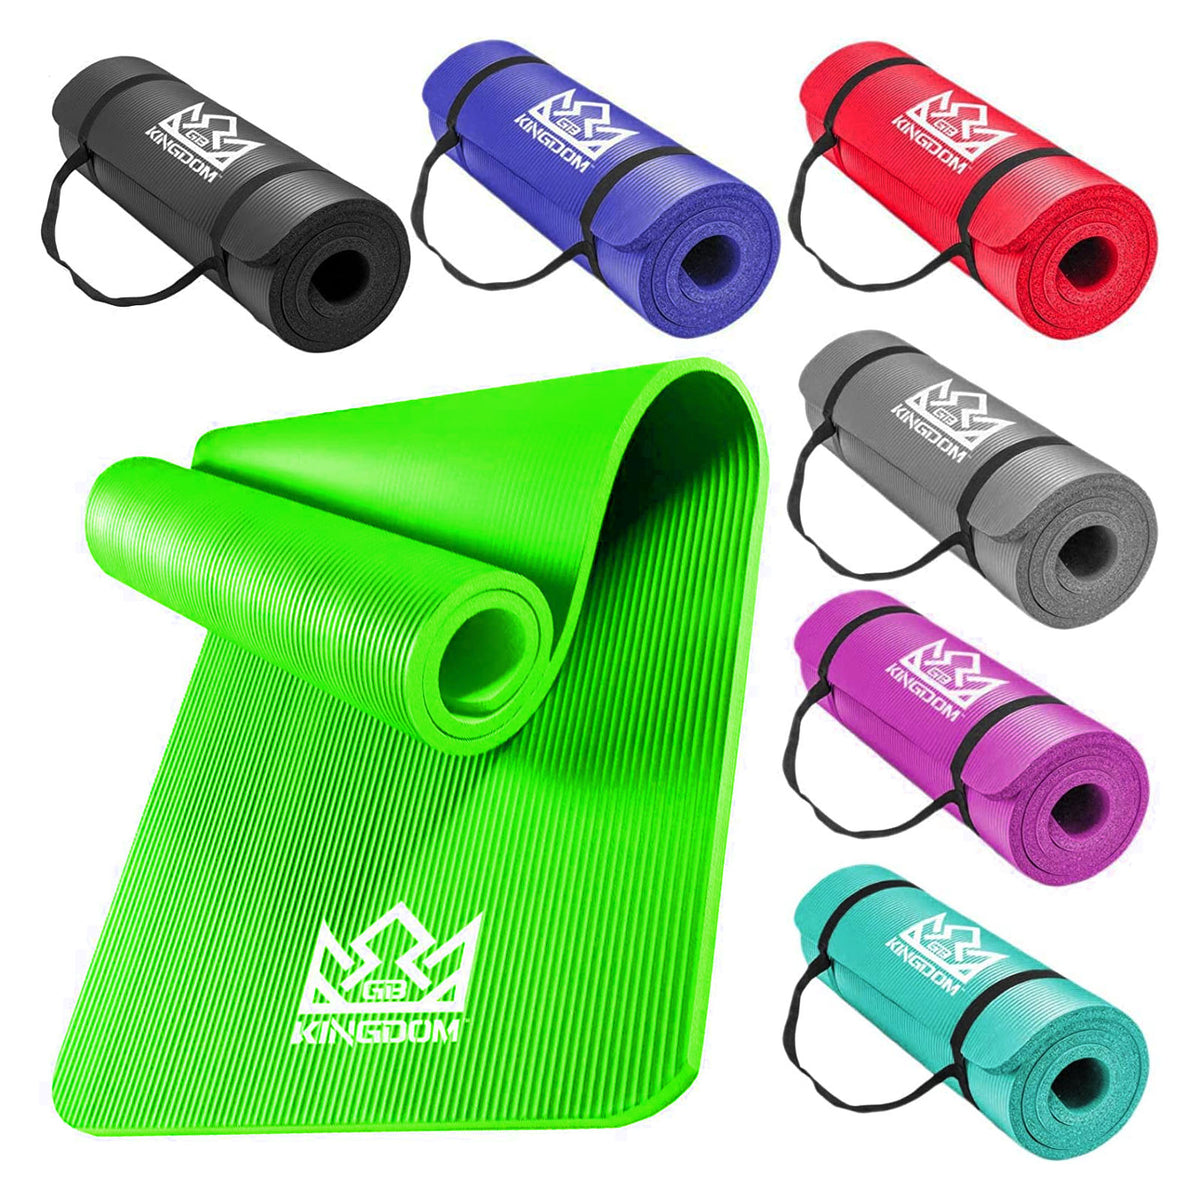 Kingdom Supreme+ 20mm Extra Thick NBR Foam Exercise Yoga Mat with Carry Strap Lime Green